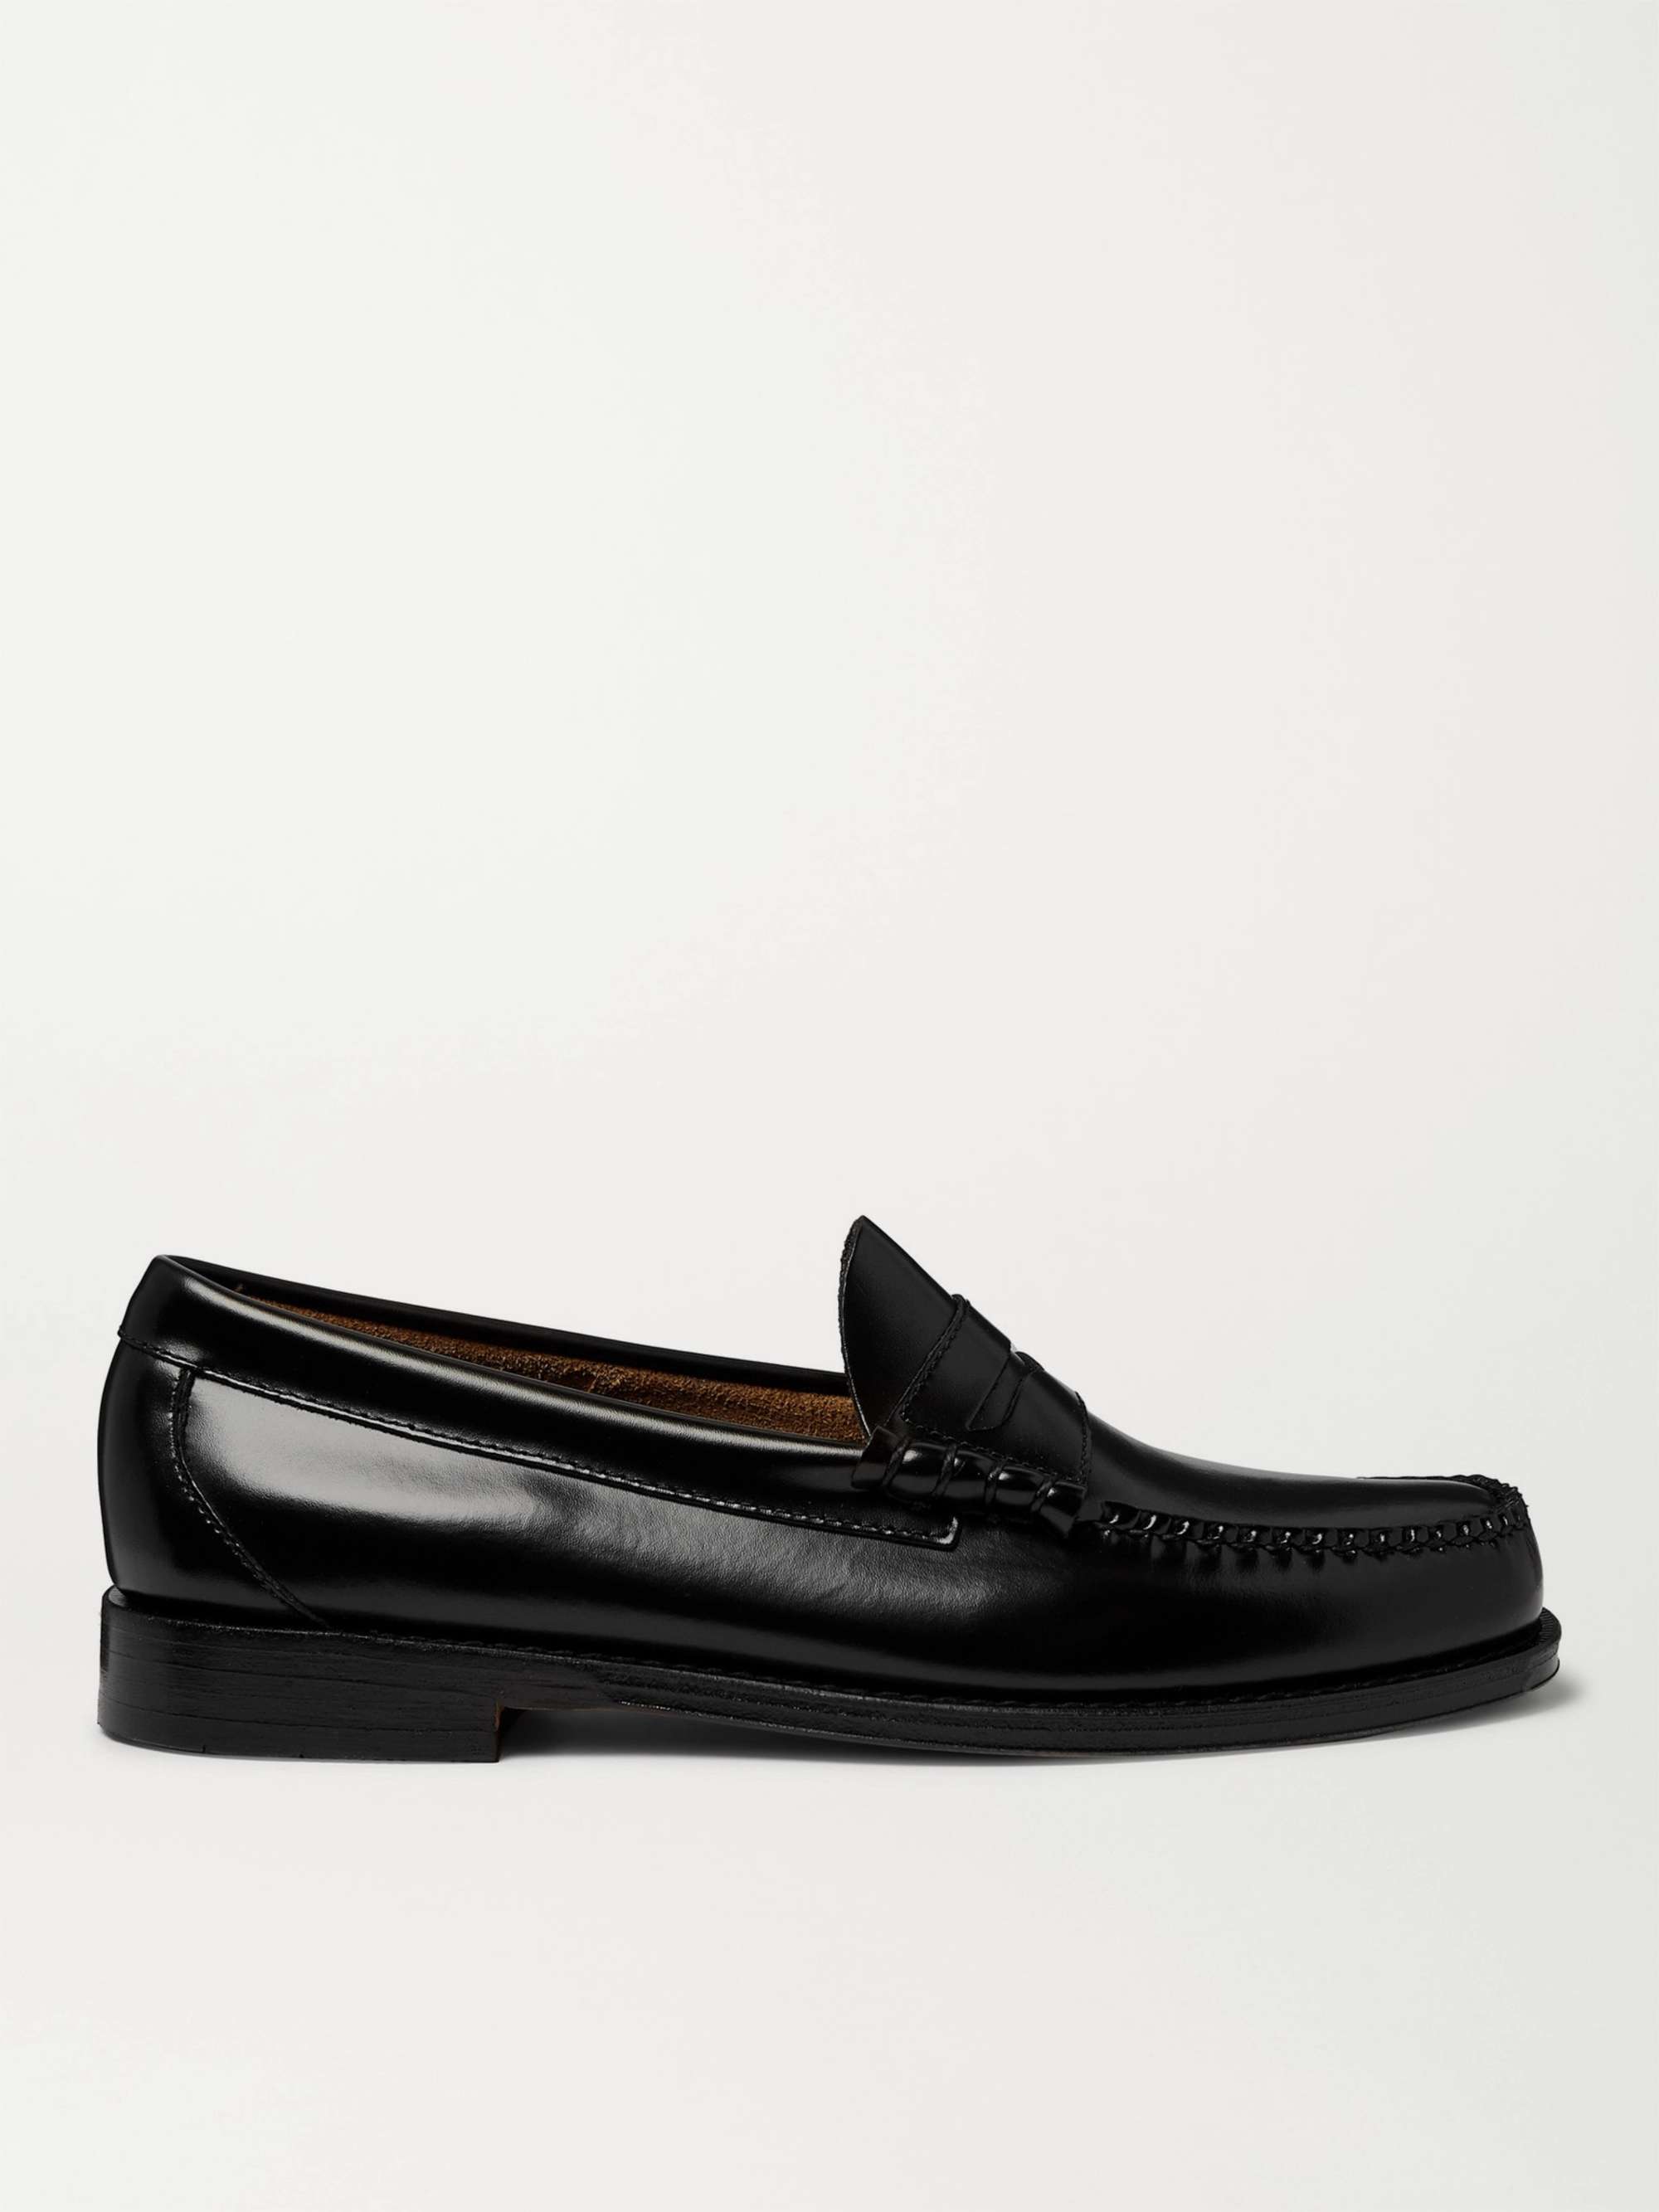 G.H. BASS & CO. Weejuns Heritage Larson Leather Penny Loafers